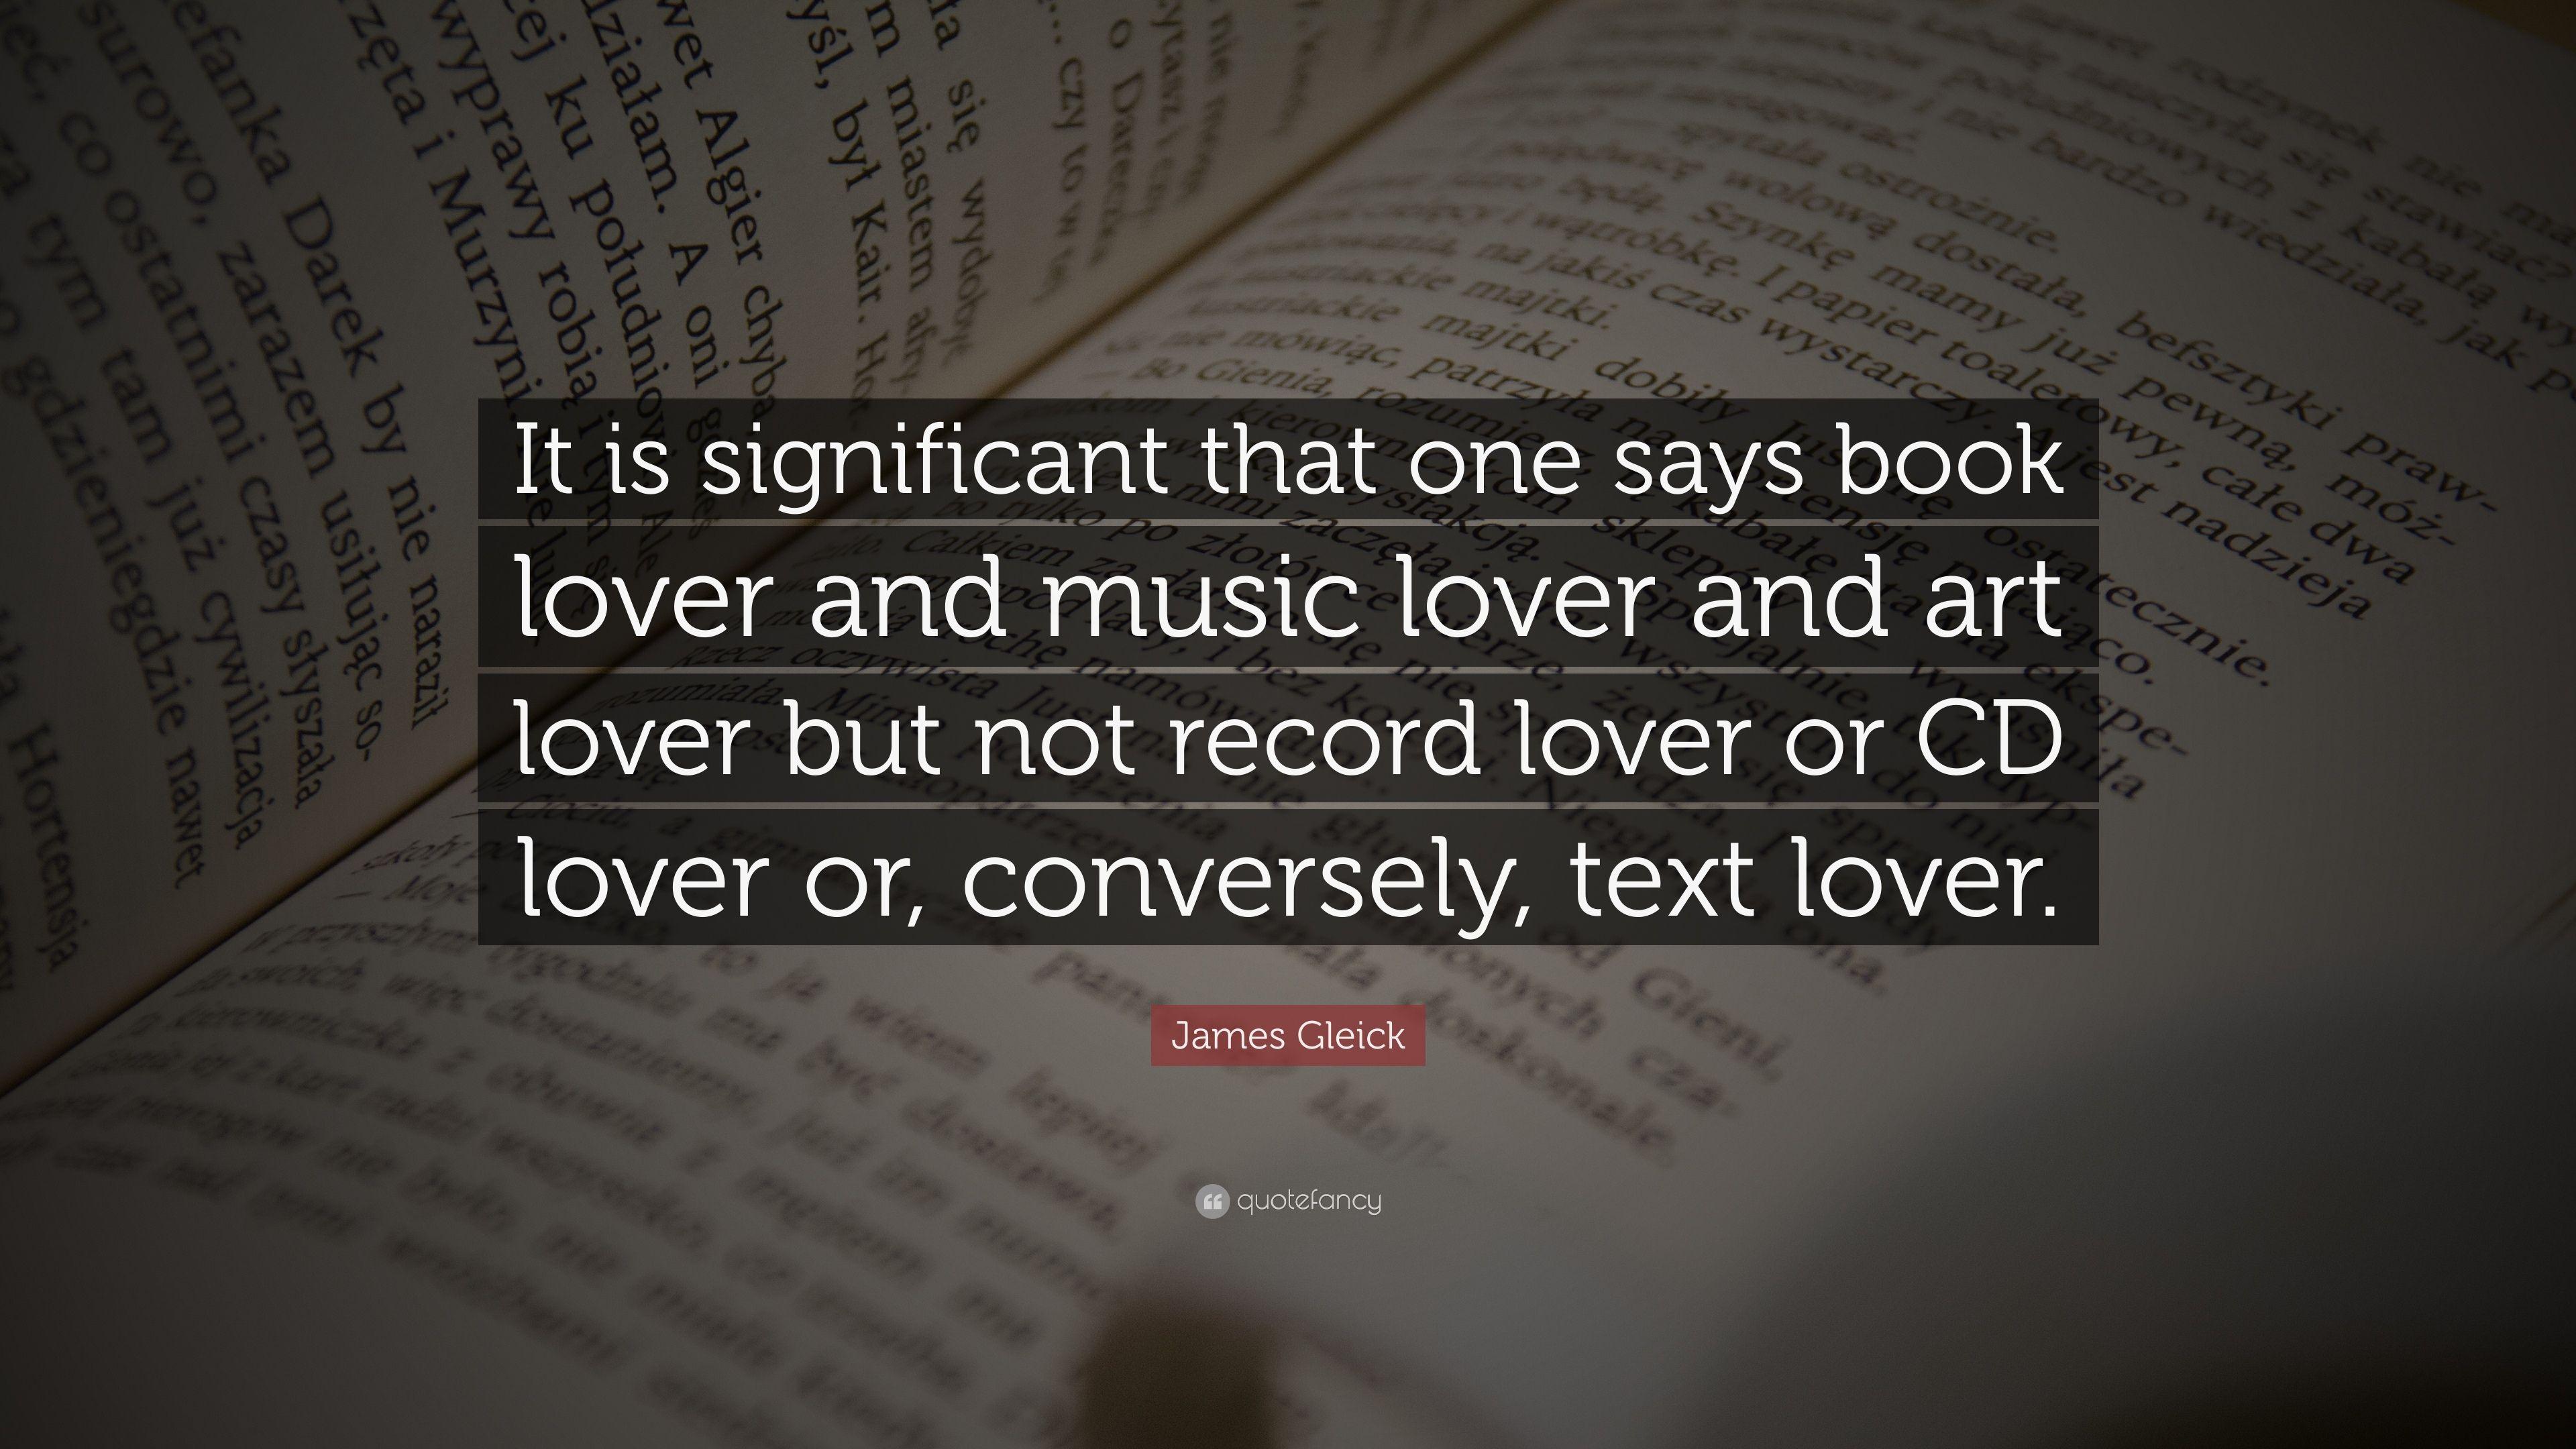 James Gleick Quote: “It is significant that one says book lover